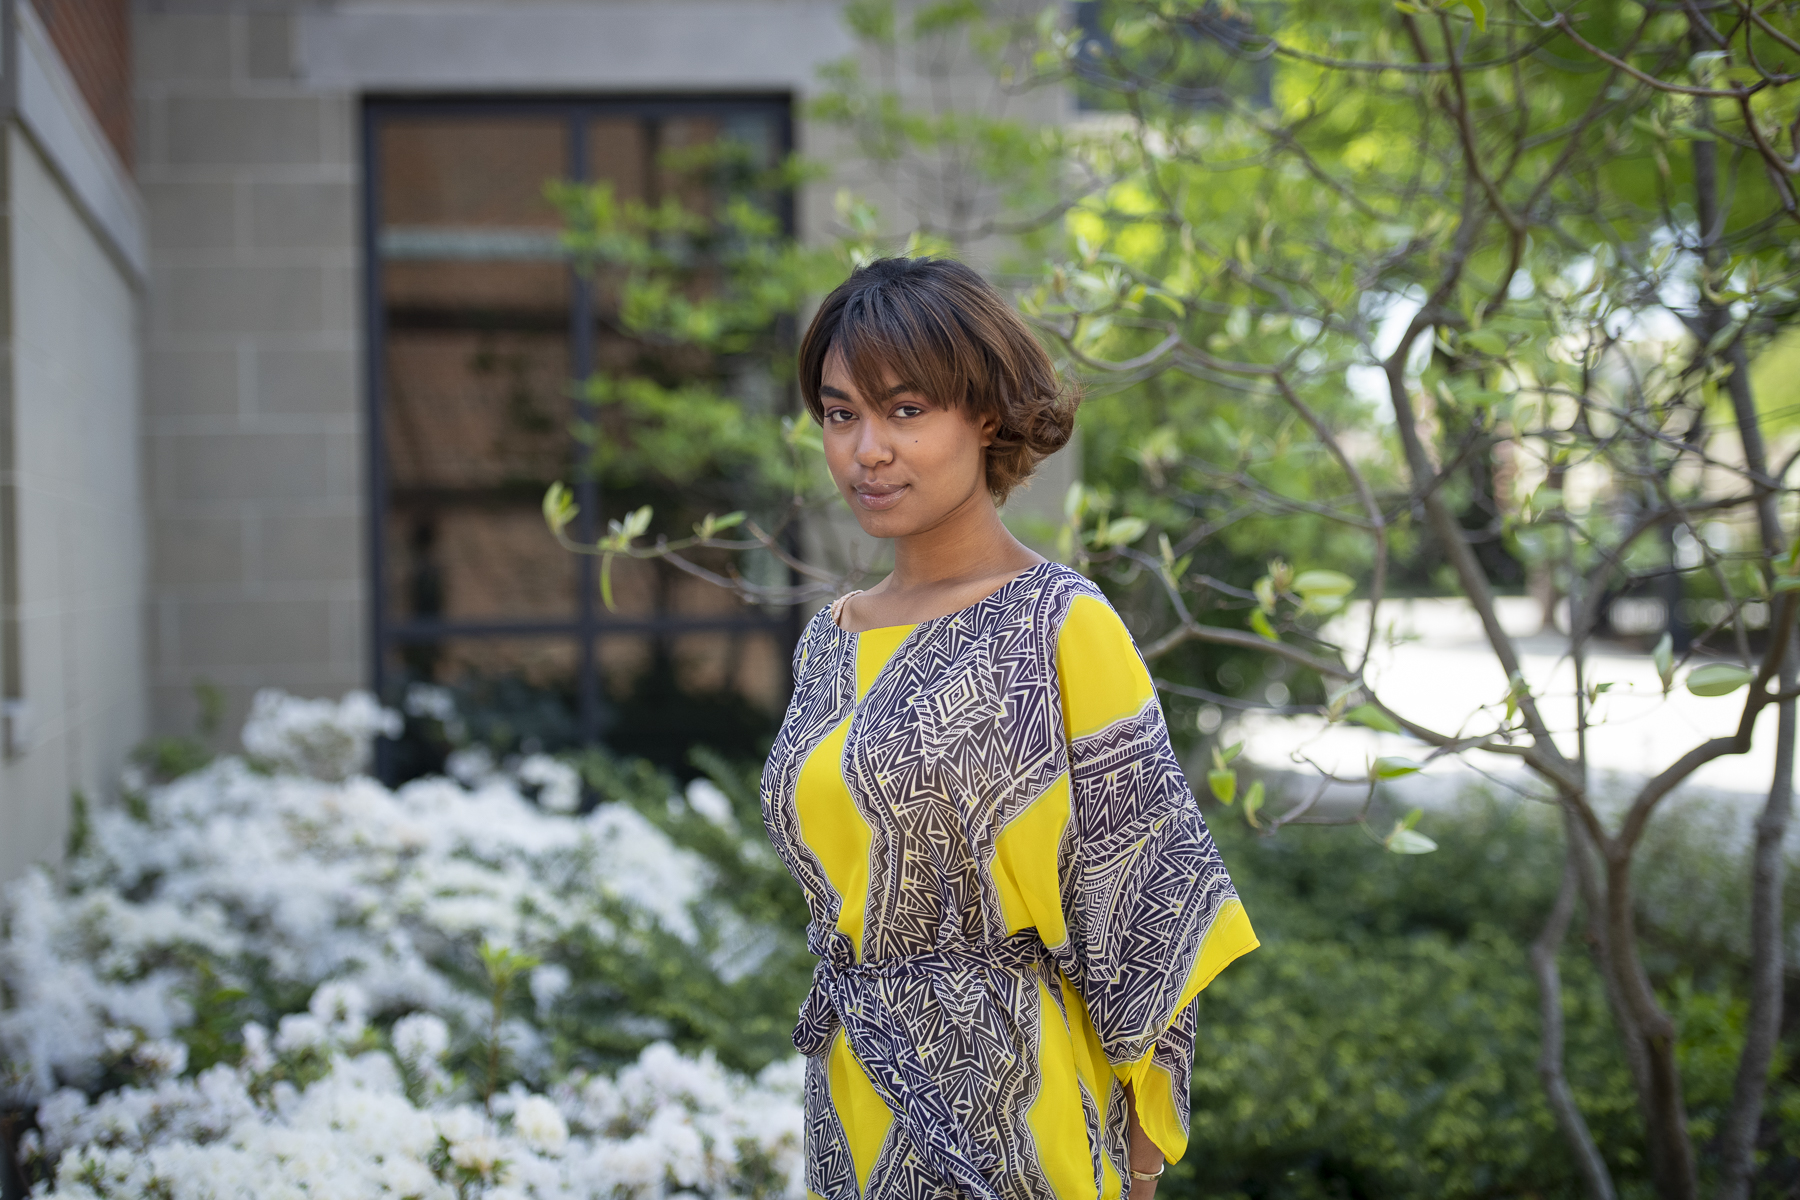 Haya Hamid standing in front of a dogwood tree wearing a yellow and gray patterned dress